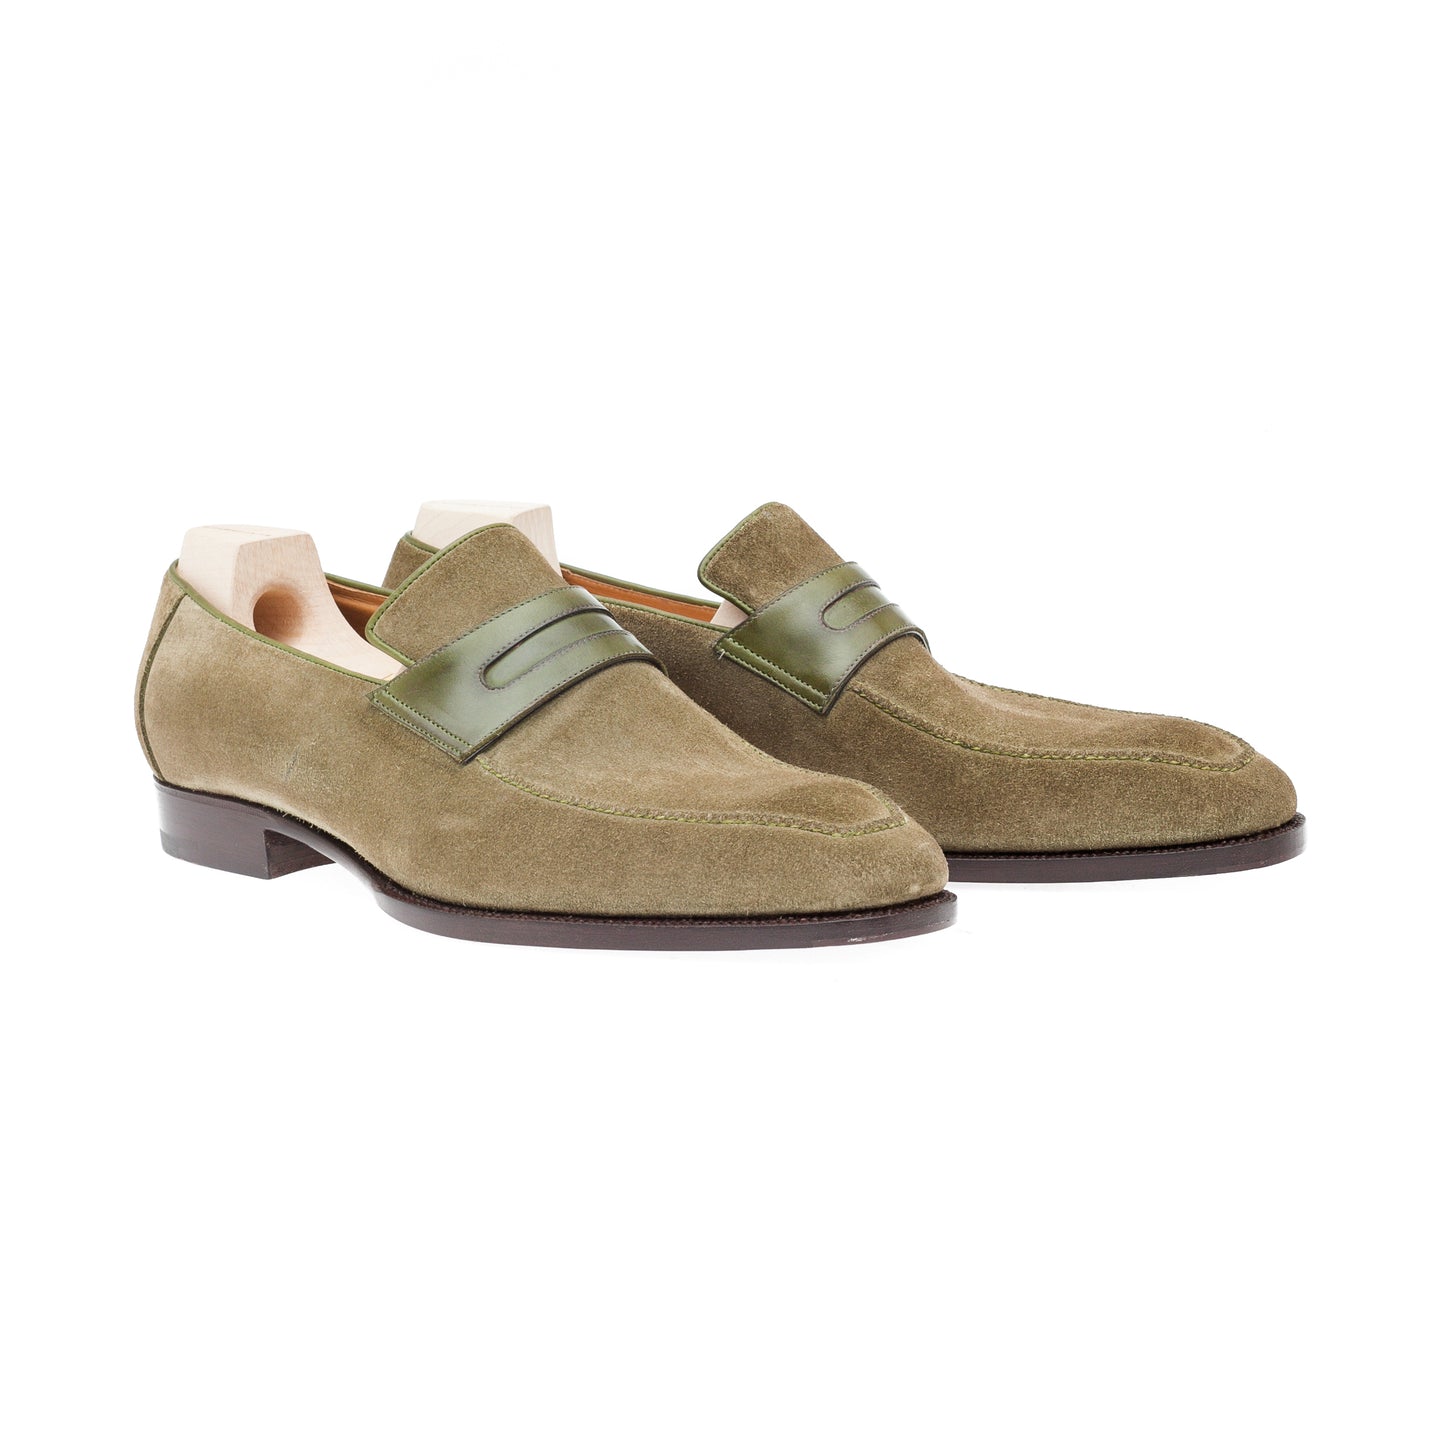 Penny Loafer with hand stitched apron in military green Janus calf